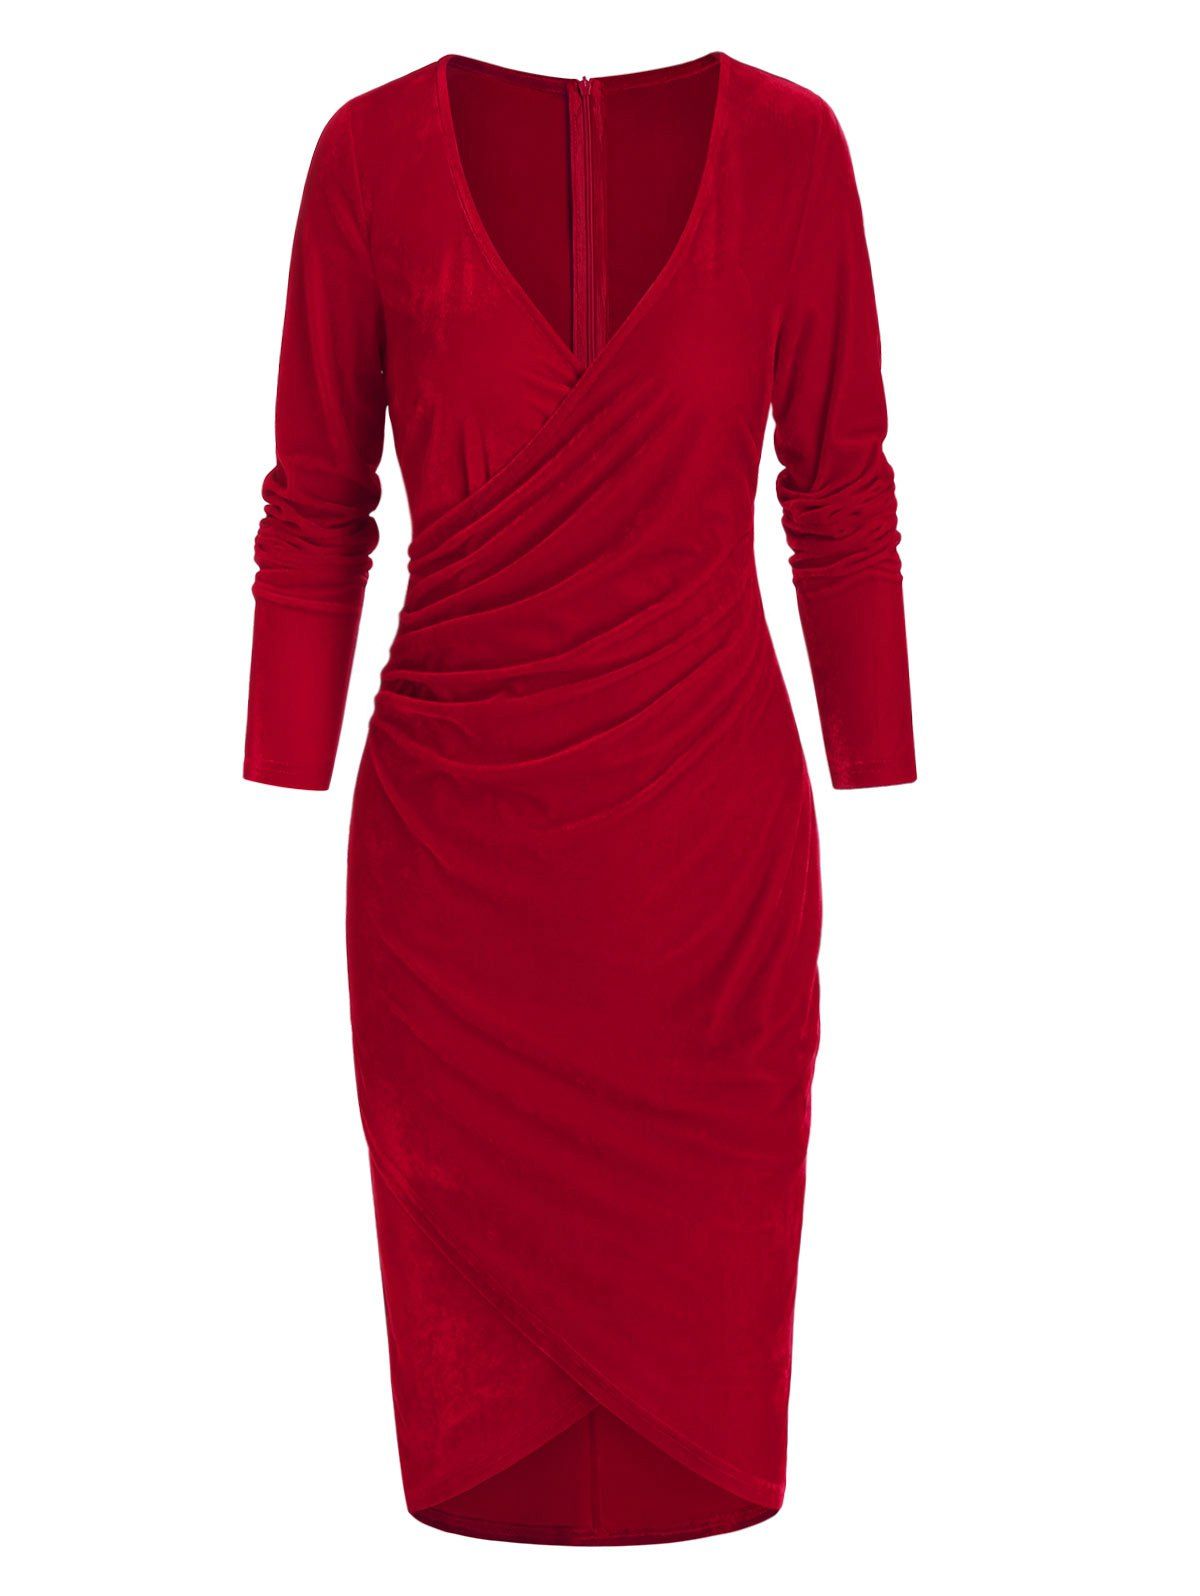 Velvet Bodycon Dress Ruched Long Sleeve Surplice Plunging Neck Knee Length Party Dress - RED 2XL